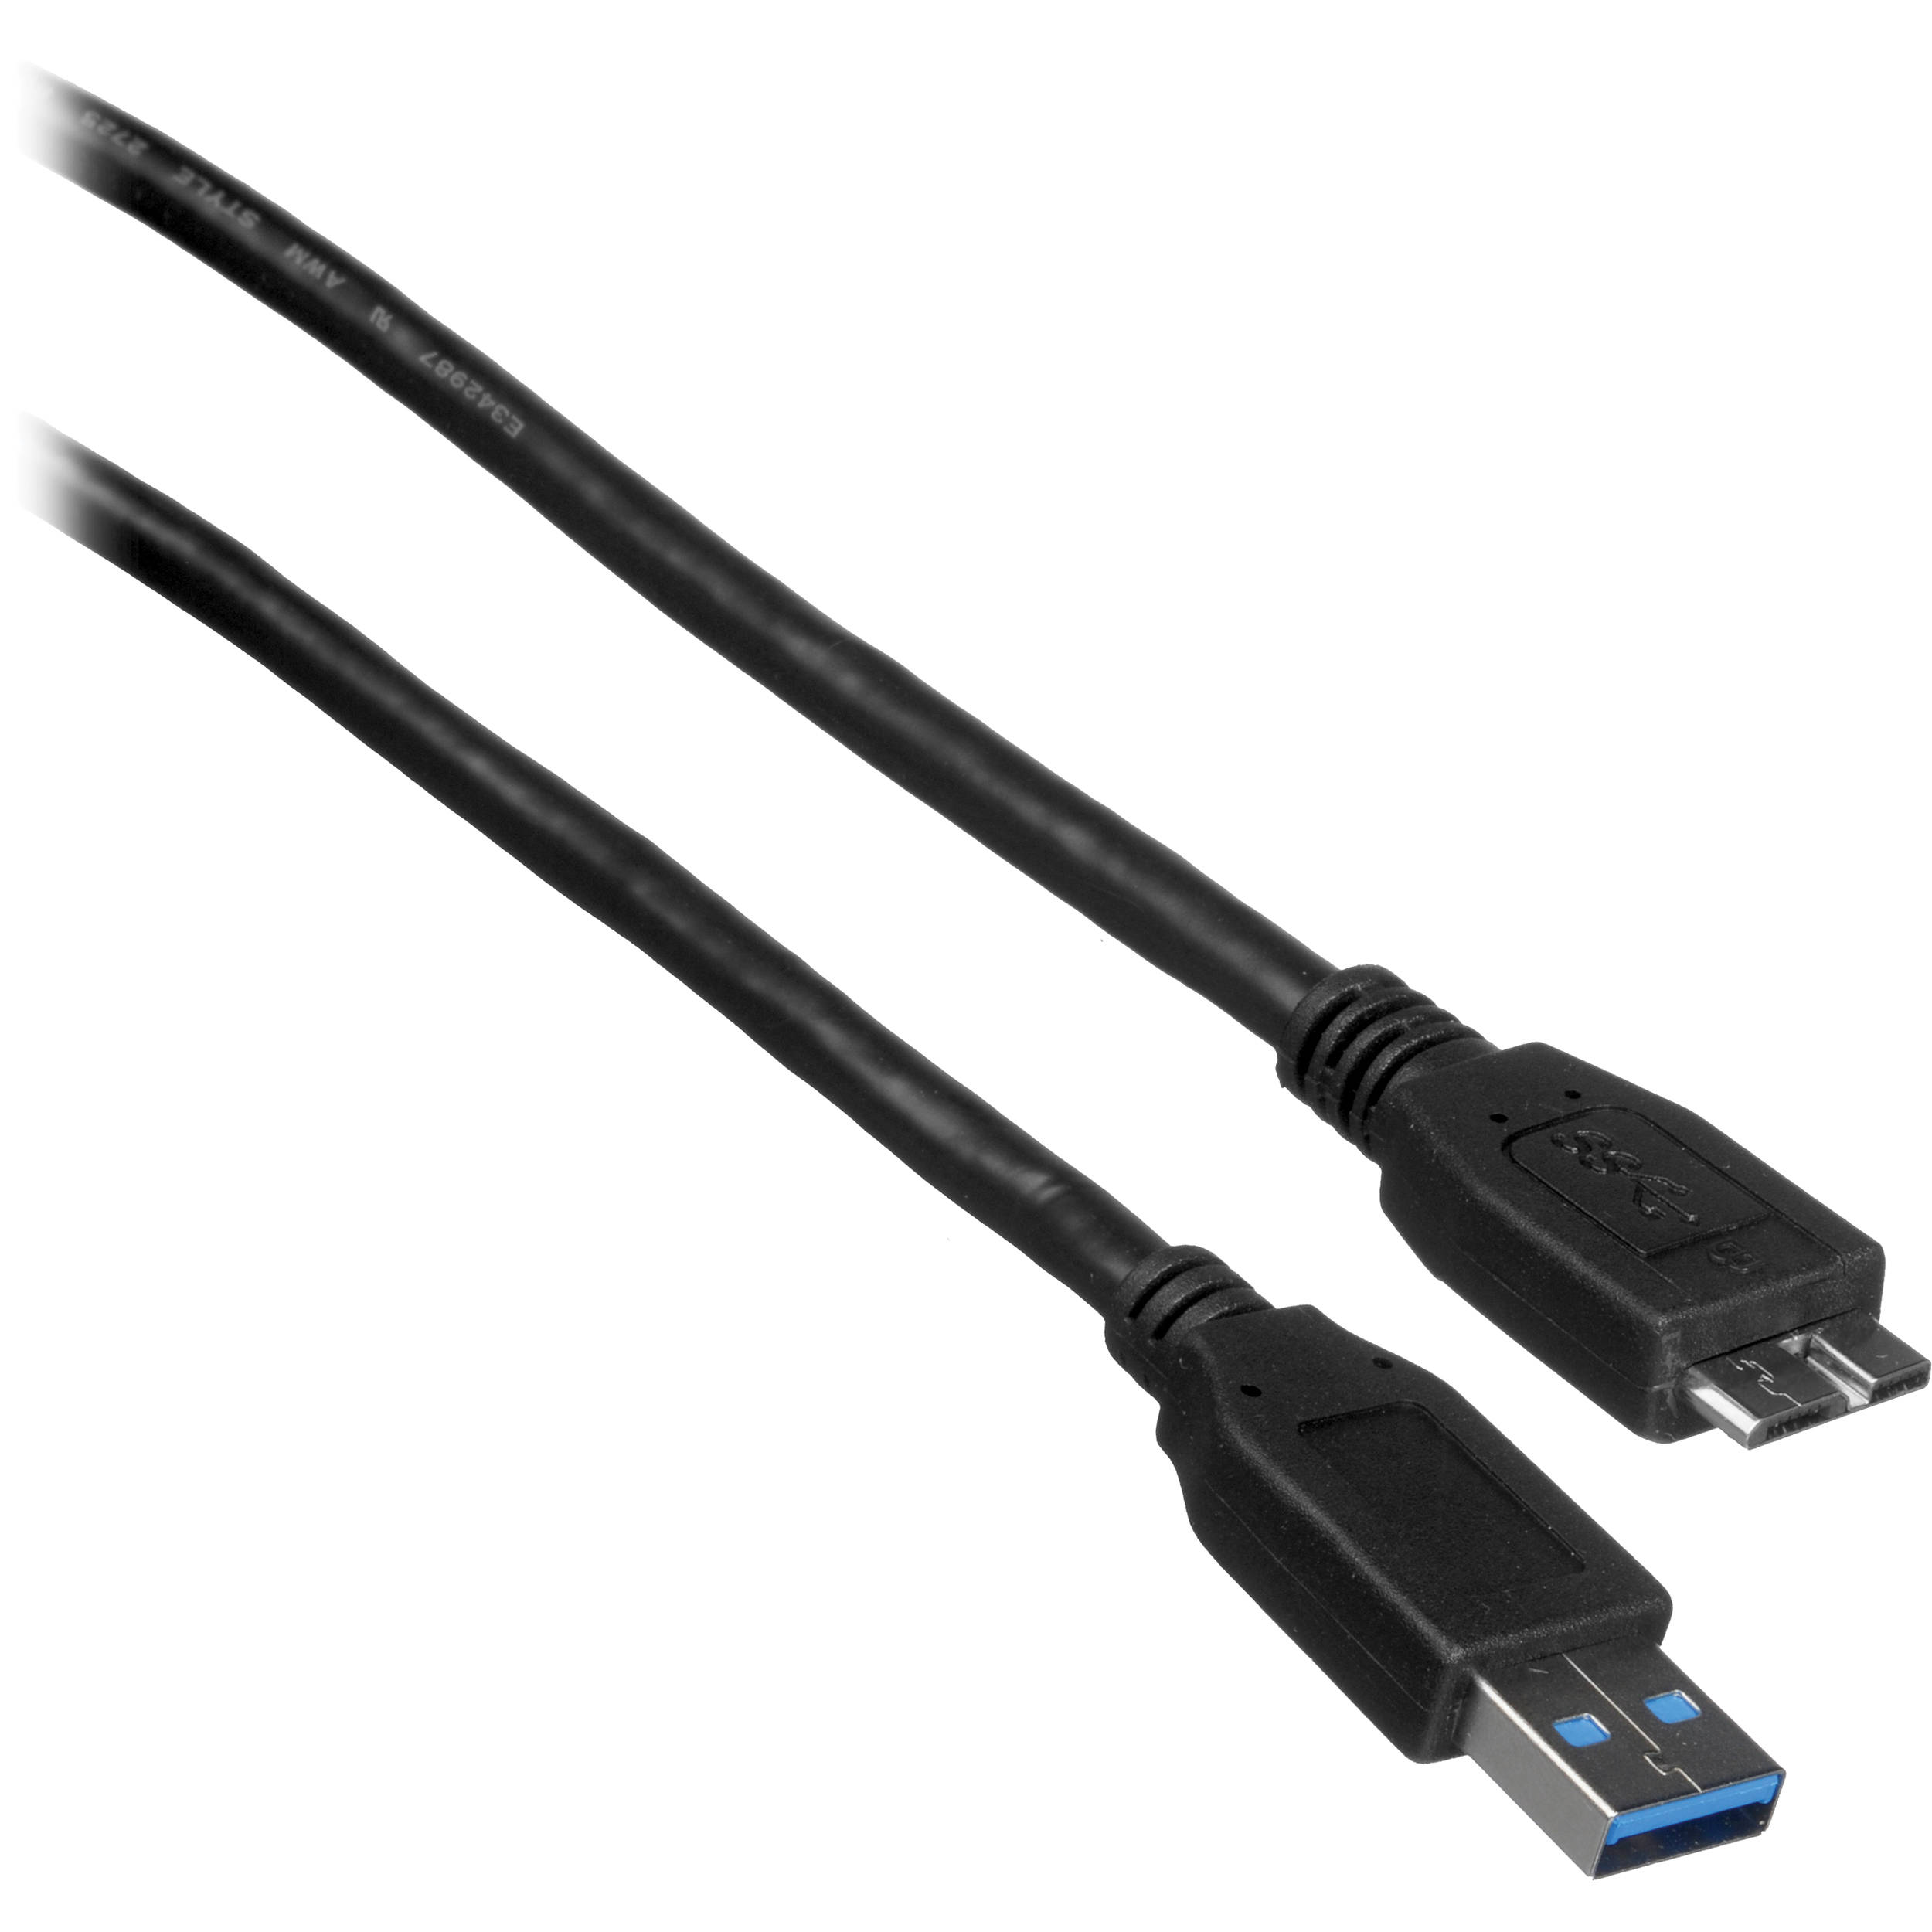 Comprehensive USB 3.1 Gen 1 Type-A Male to Micro-USB Male Cable (Black, 15')